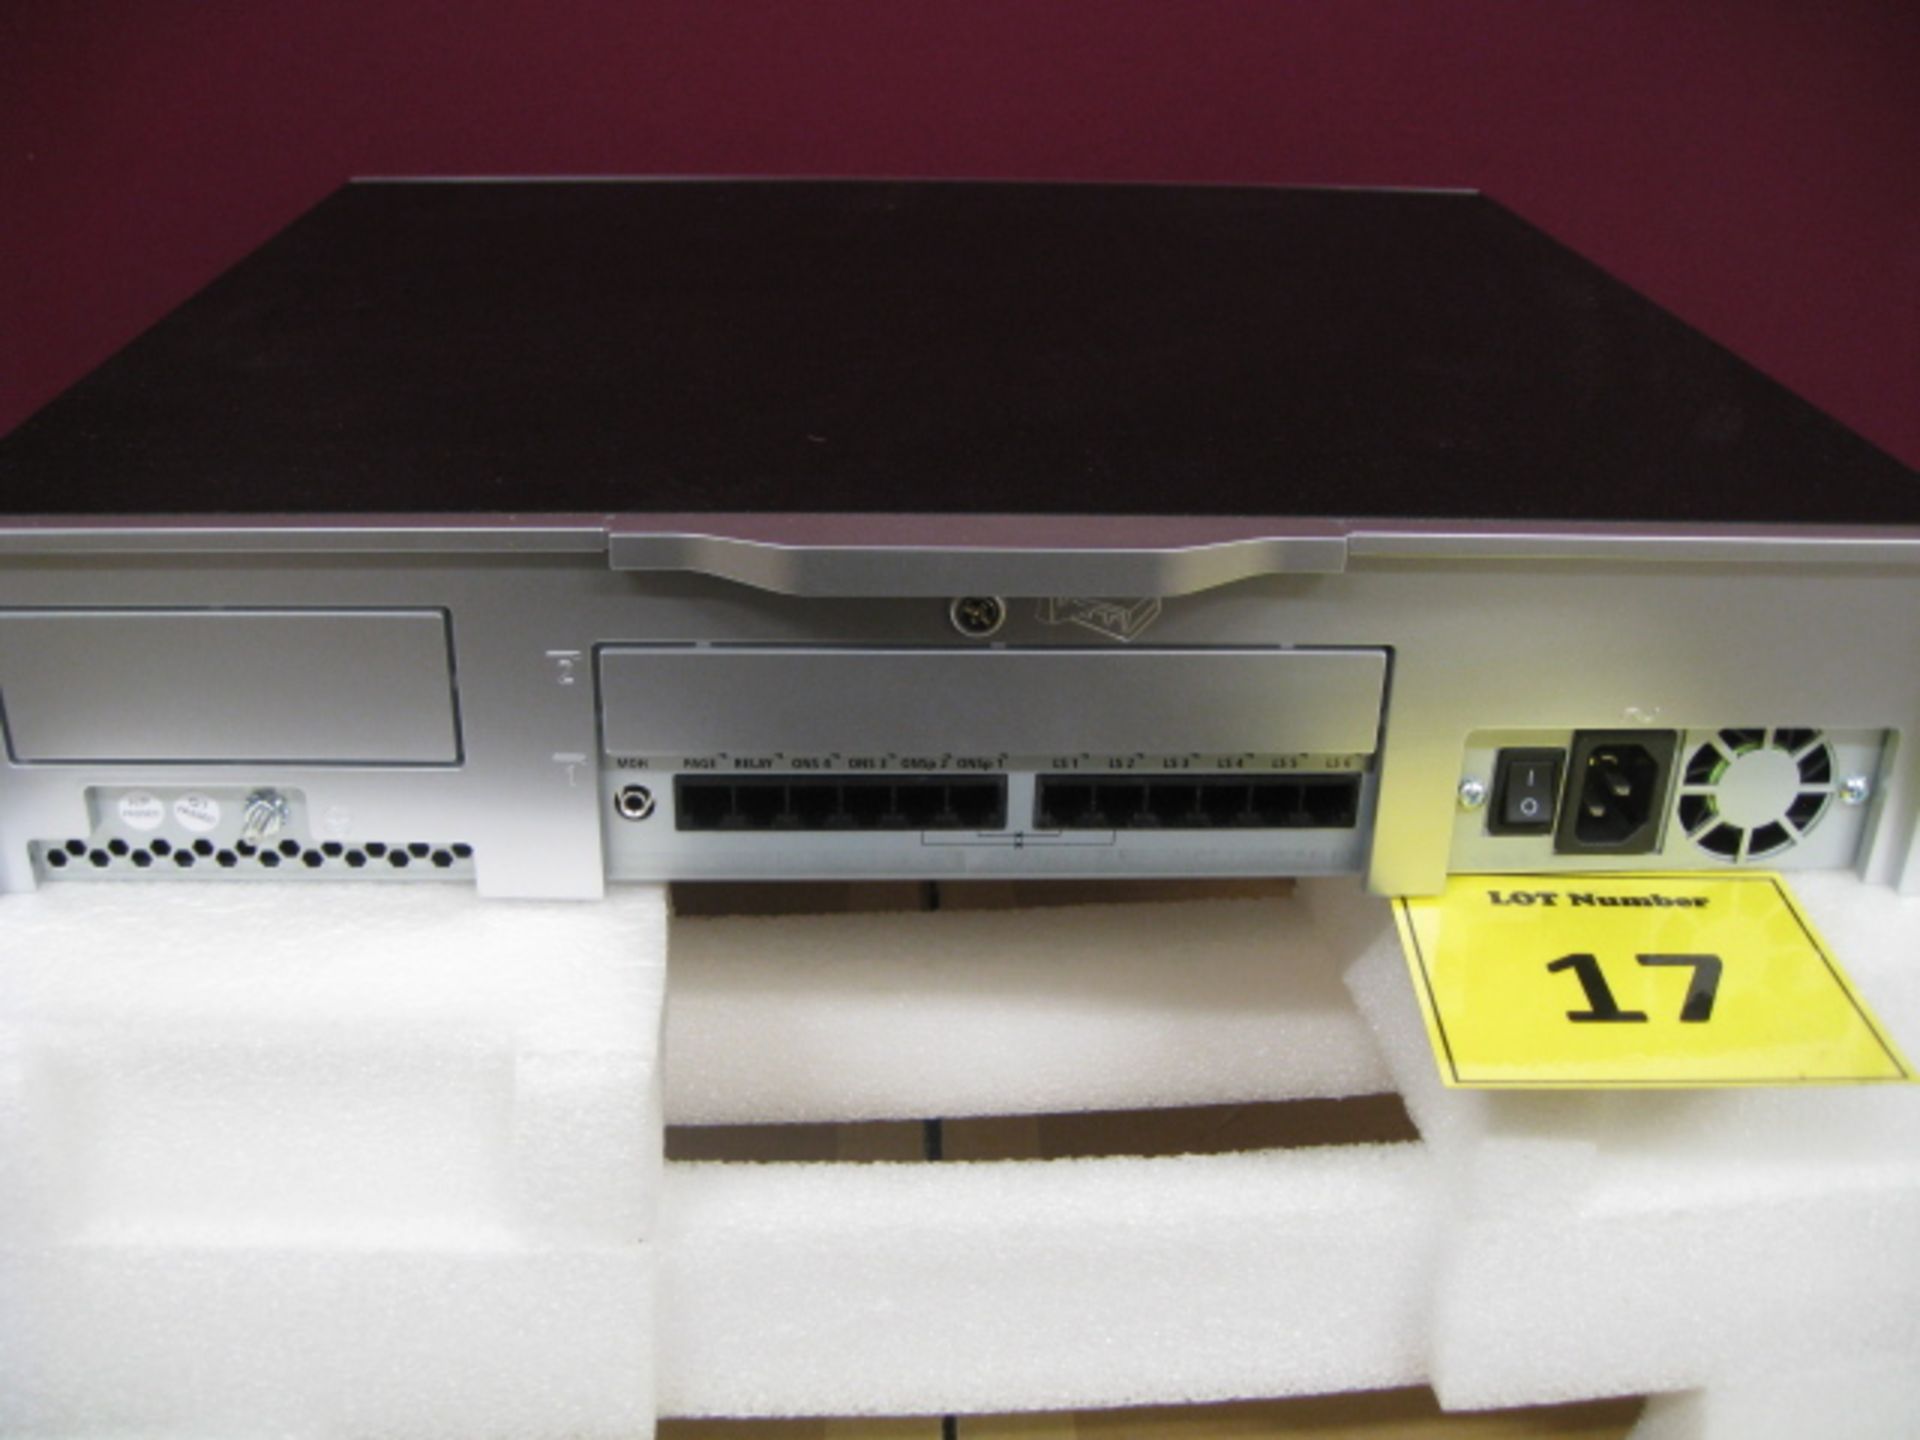 Mitel 3300 CXi II Controller. BOXED WITH SAFETY INSTRUCTIONS - Image 3 of 7